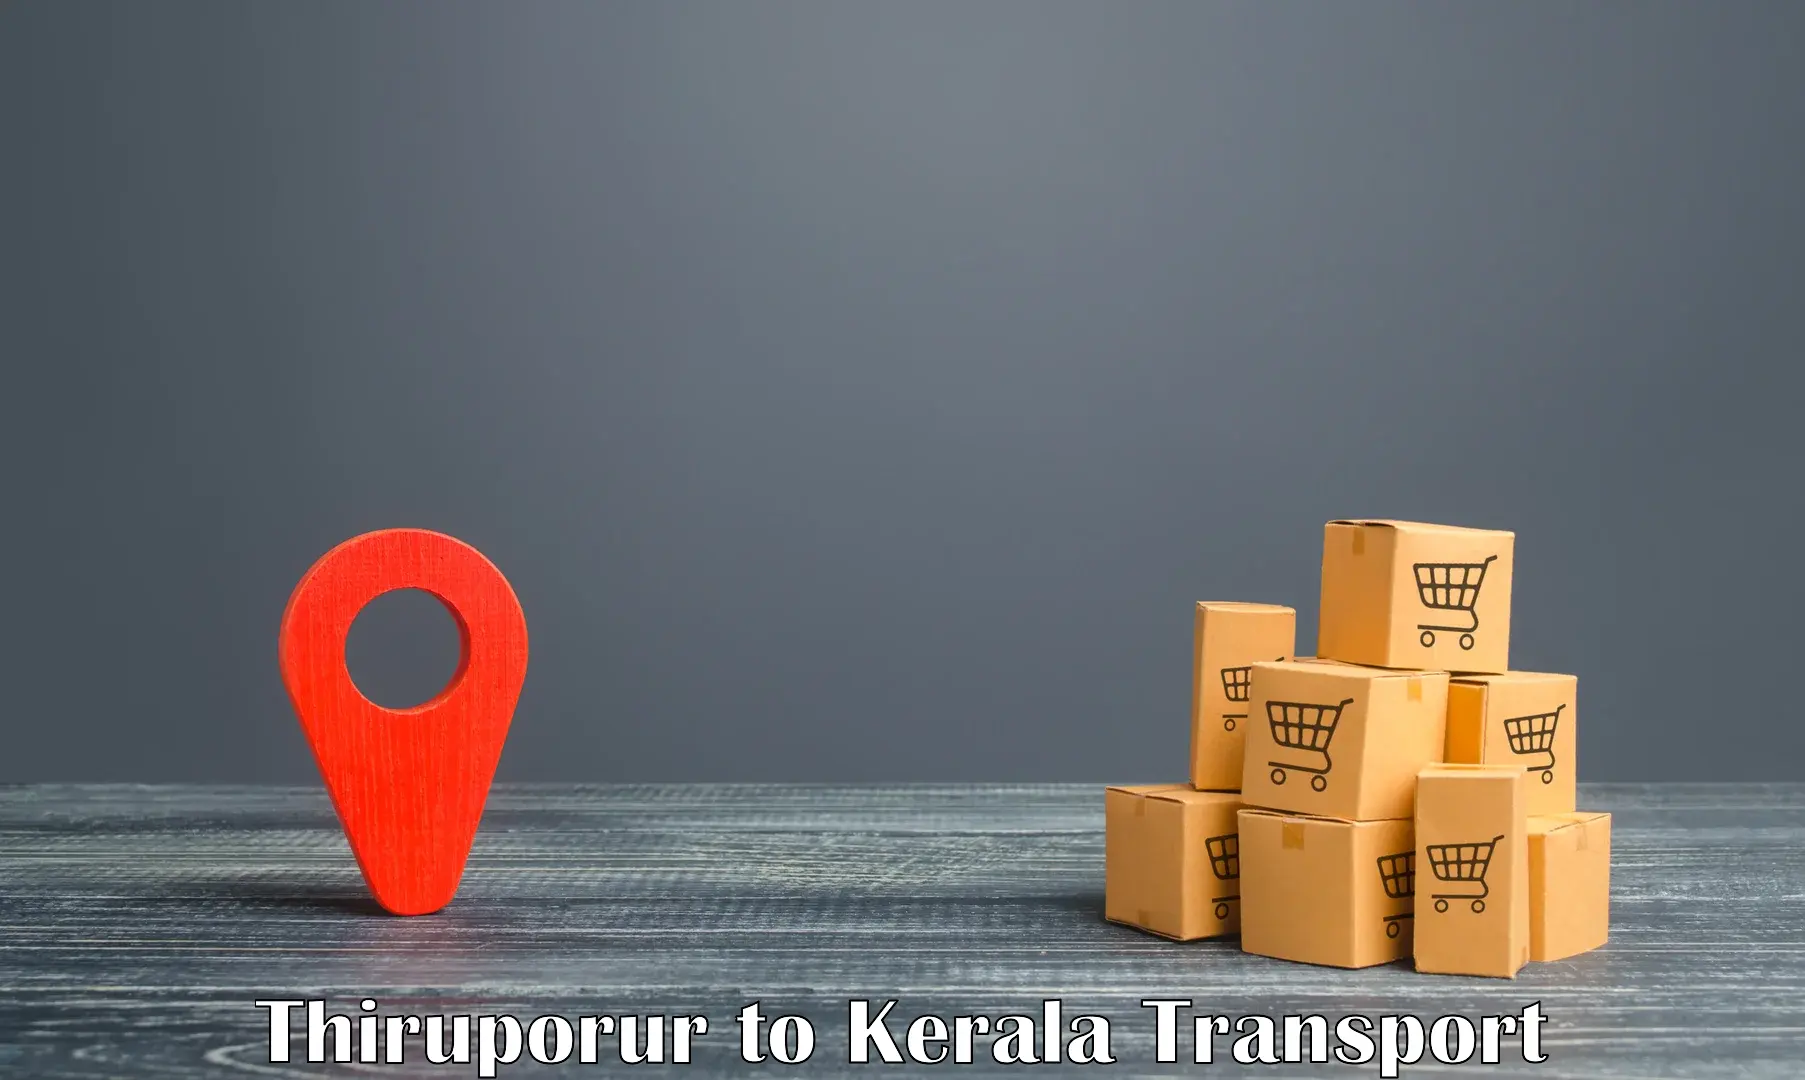 Express transport services Thiruporur to Chalakudy